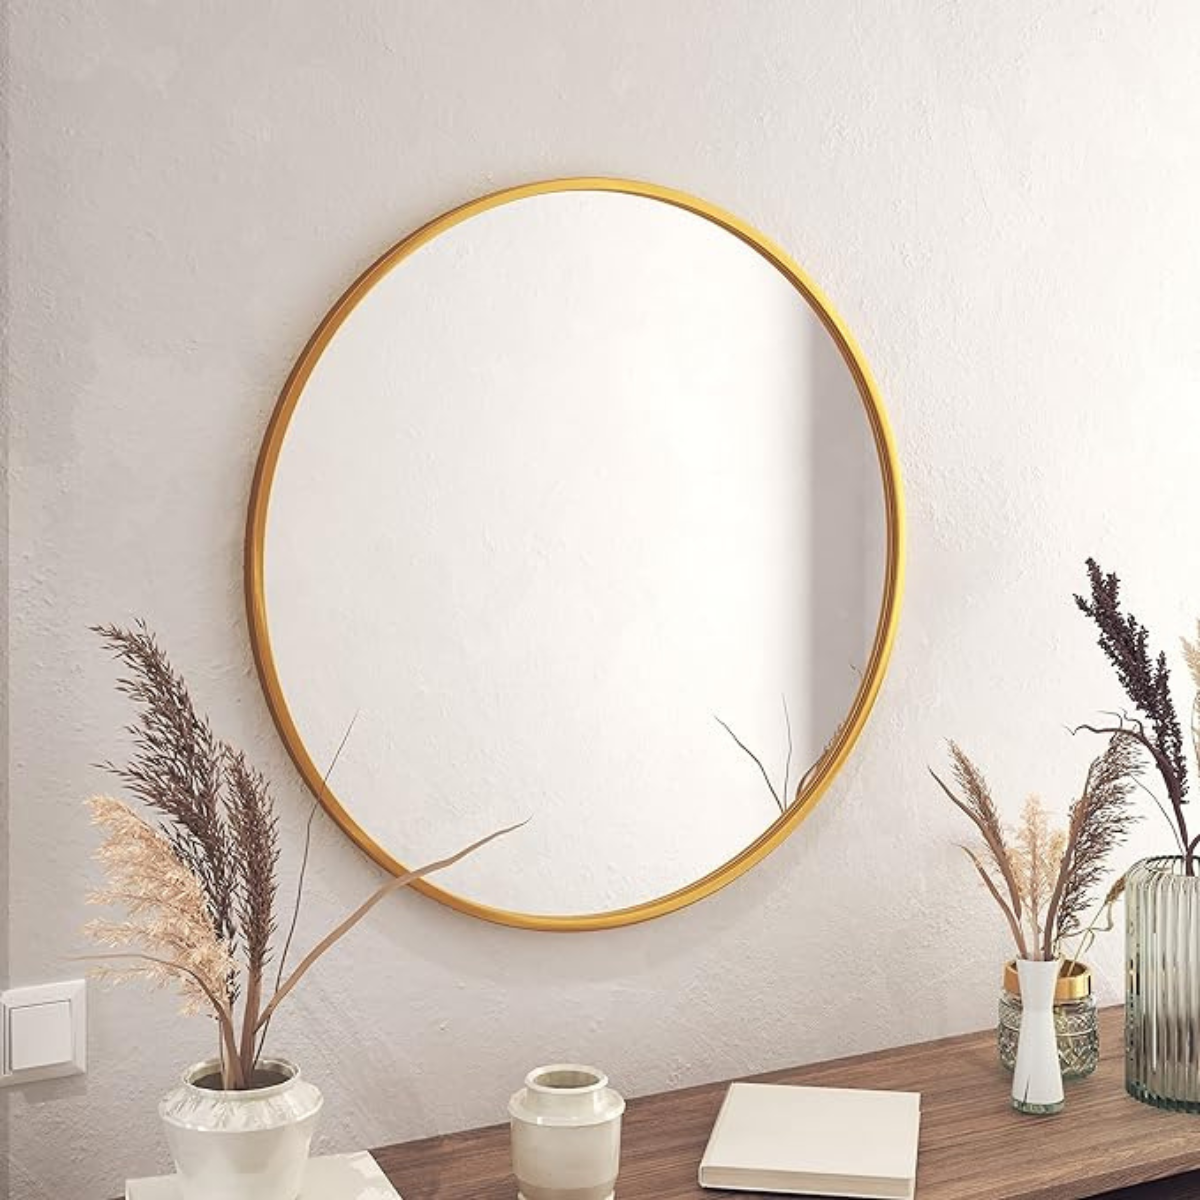 If You’re Short on Space but Big on Decor, These 38 Things From Amazon Are Cute and Compact